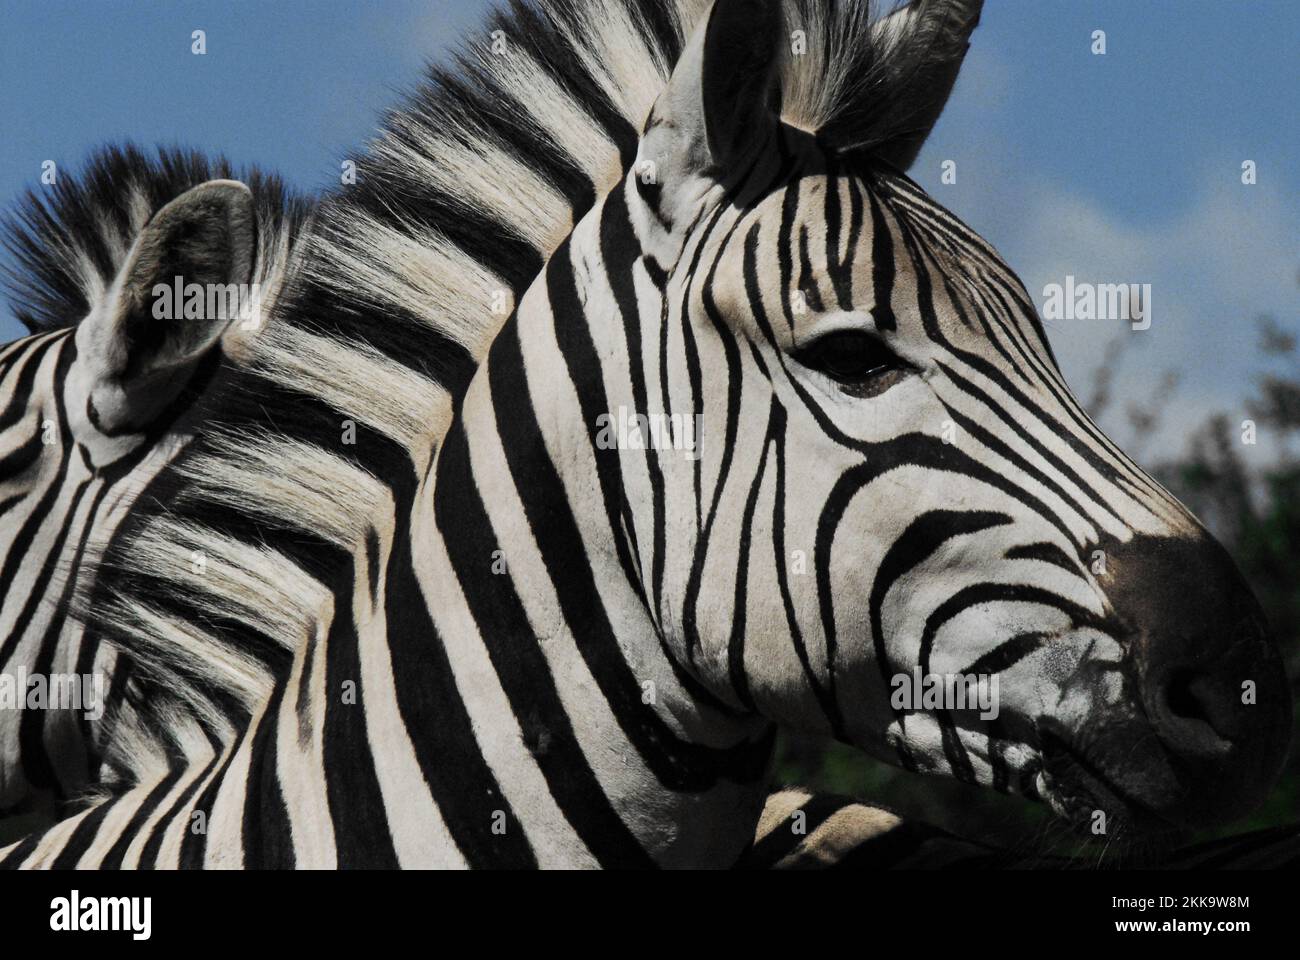 A beautiful close up of a wild Zebra's head with details of mane, fur and face.  Photographed while on safari in South Africa. Stock Photo